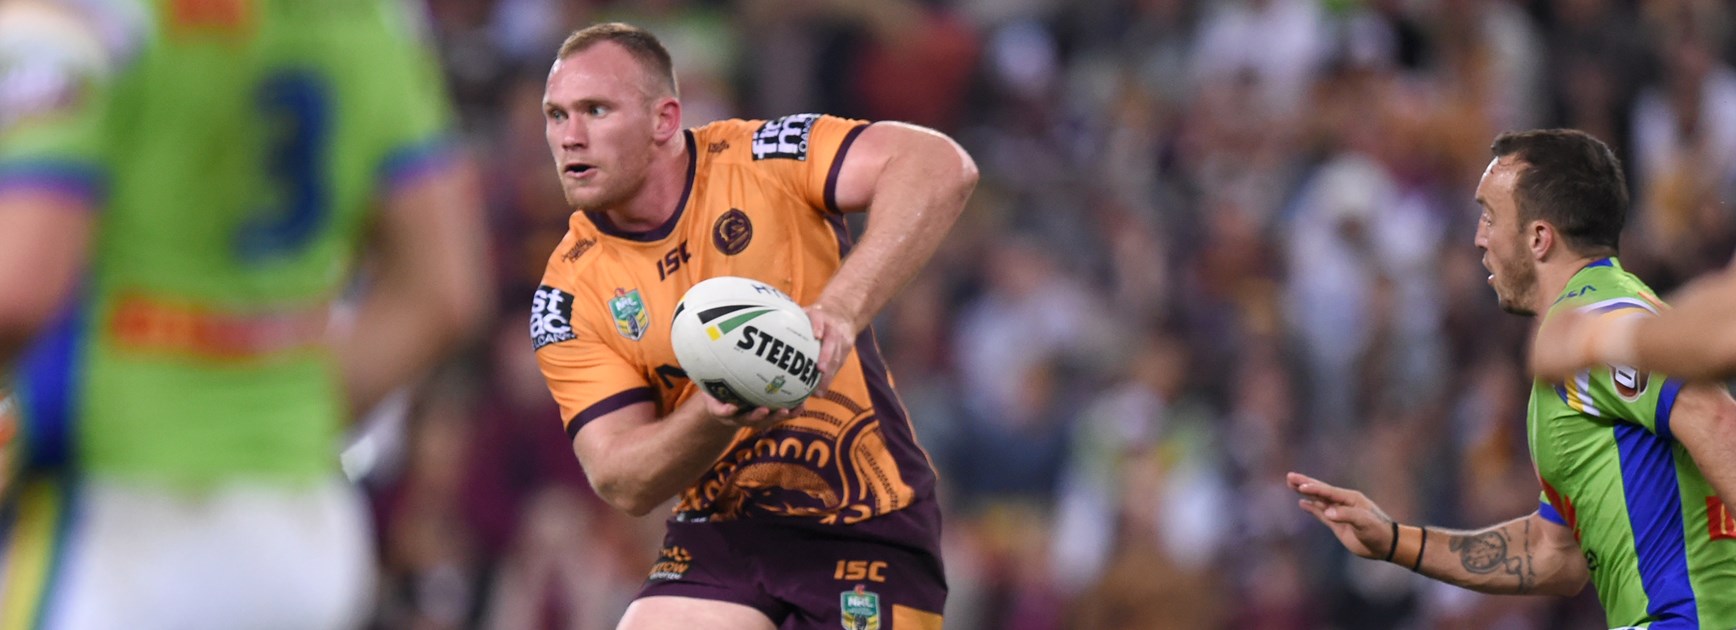 Lodge keen to ink new deal to lead Broncos pack long term